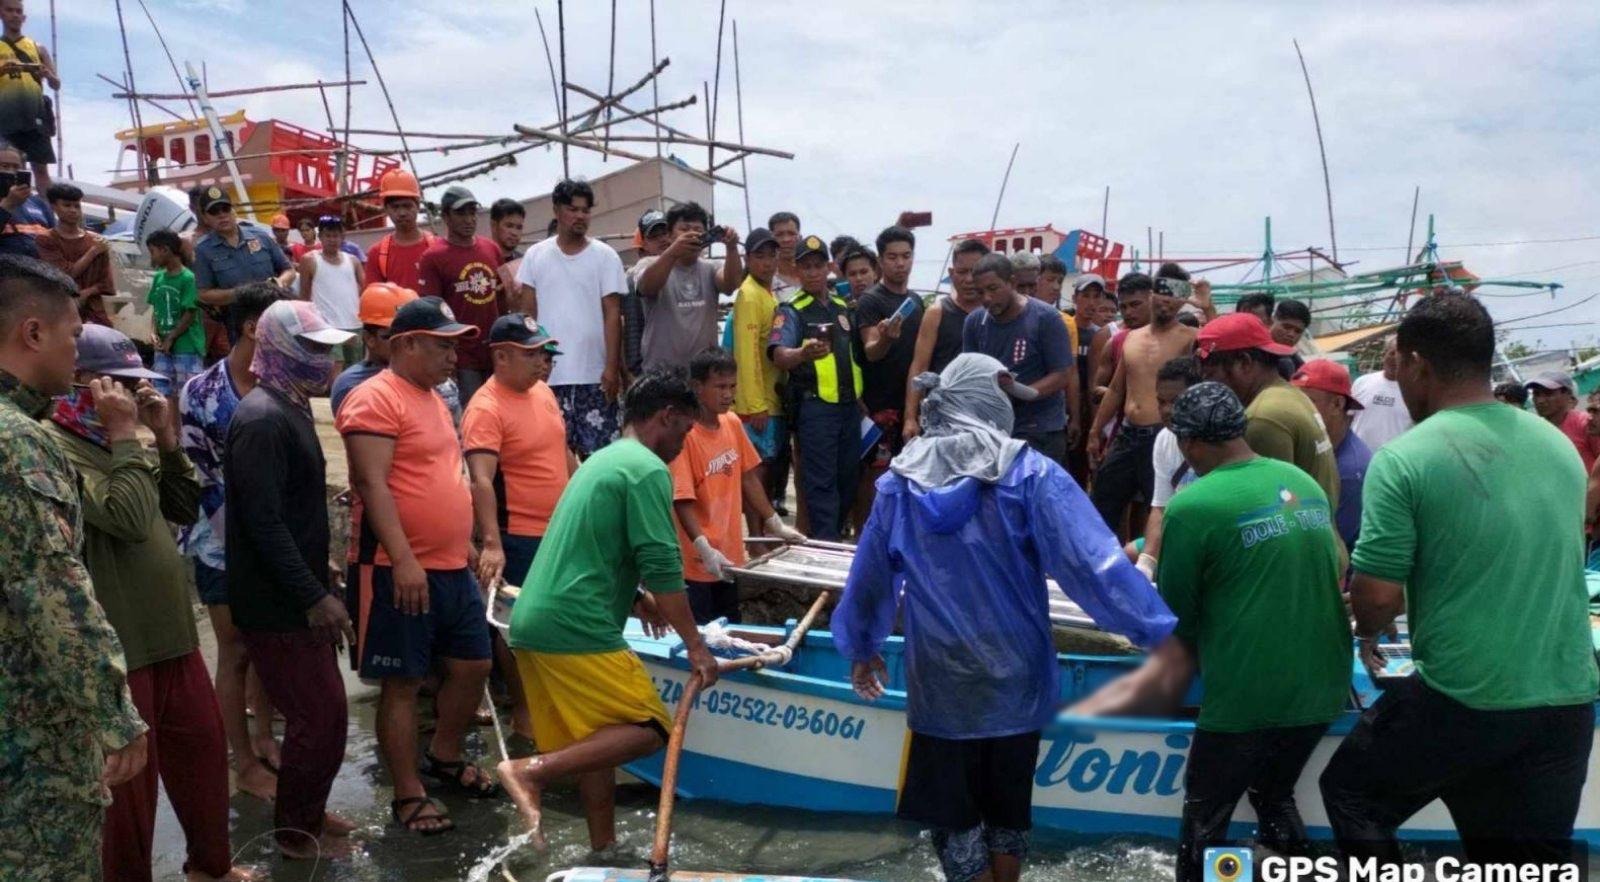 3 Dead After Fishing Boat Rammed Near Scarborough Shoal, Philippine Coast  Guard Says - USNI News